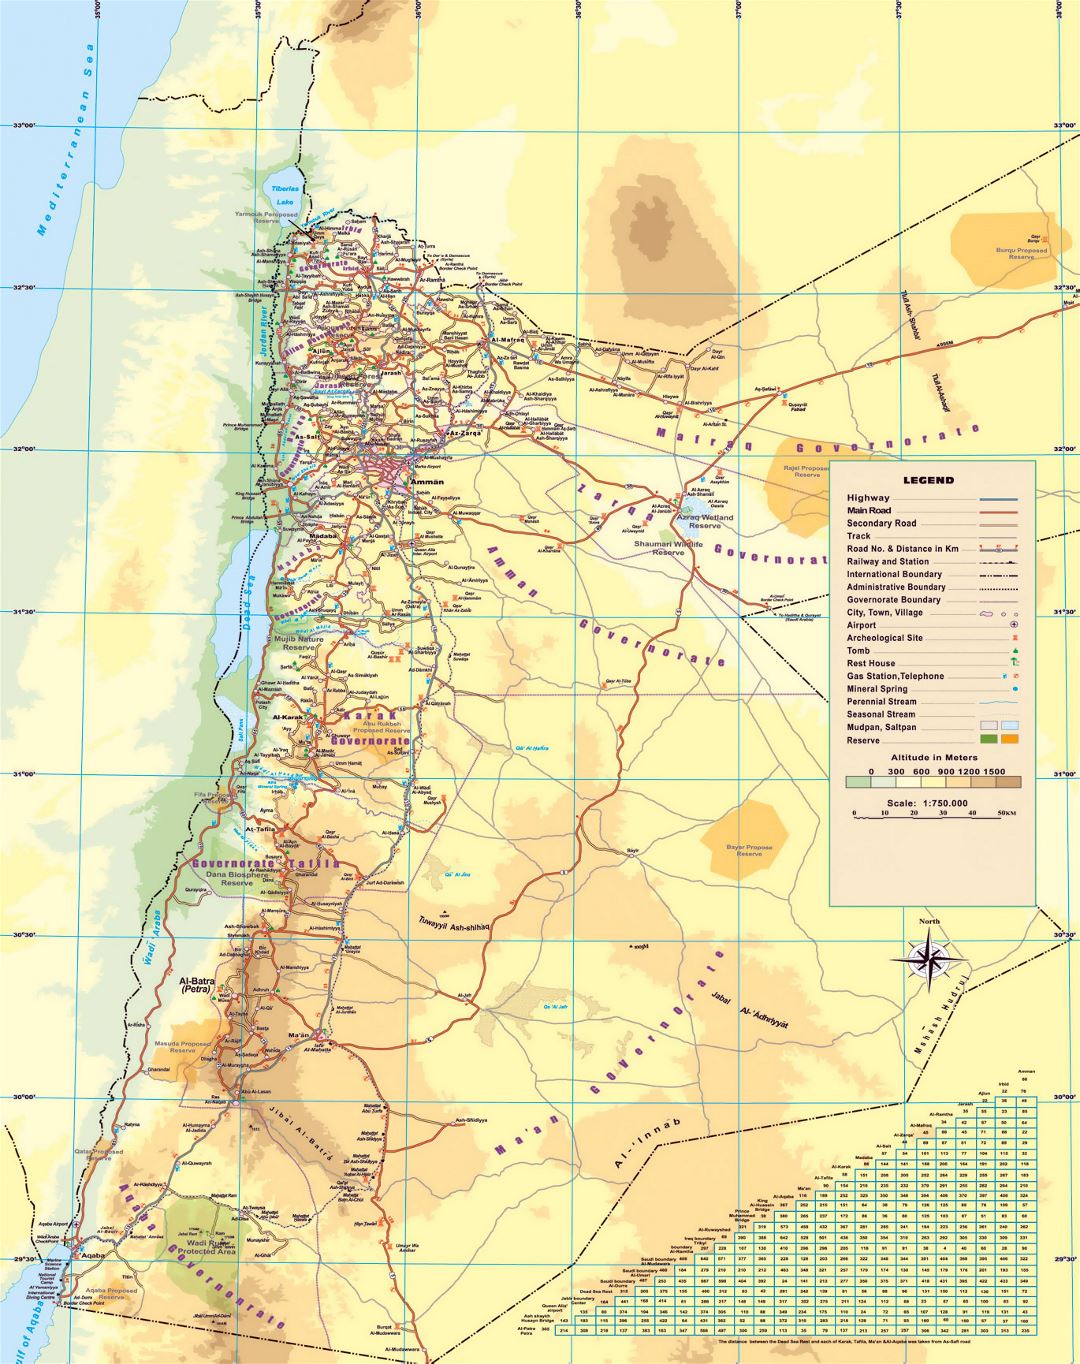 Large elevation map of Jordan with roads, cities, airports and other marks